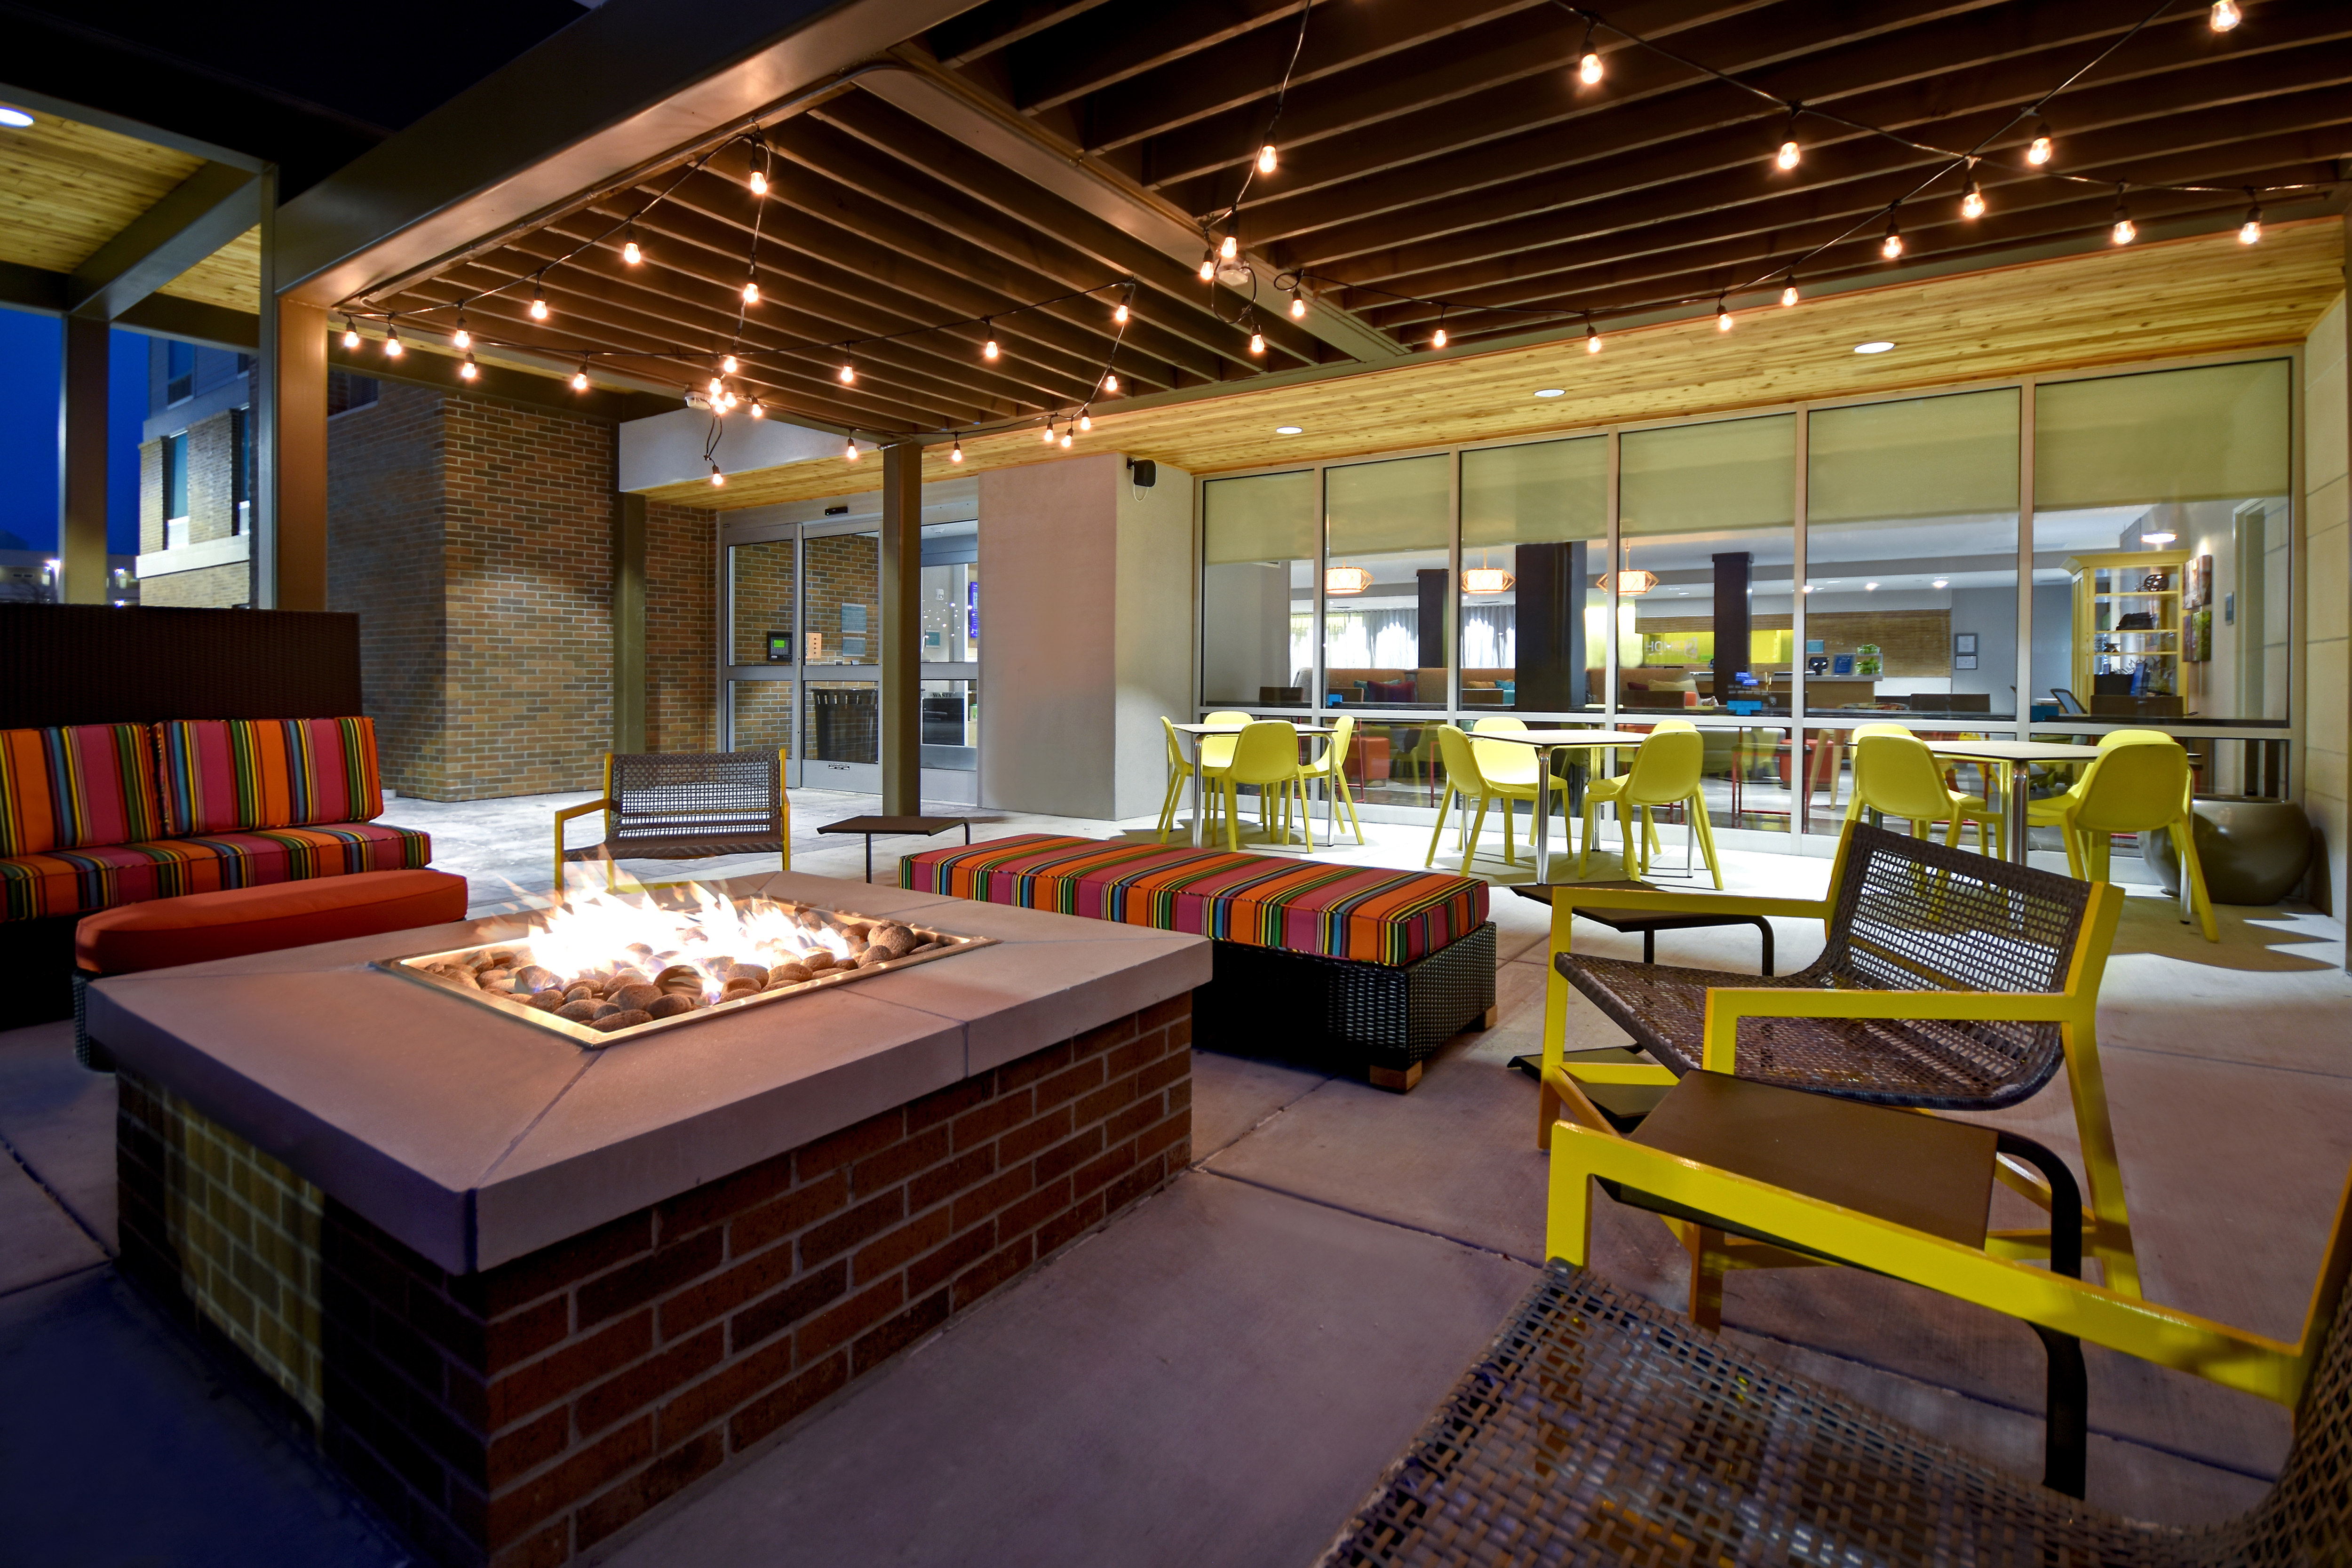 outdoor patio with firepit at dusk